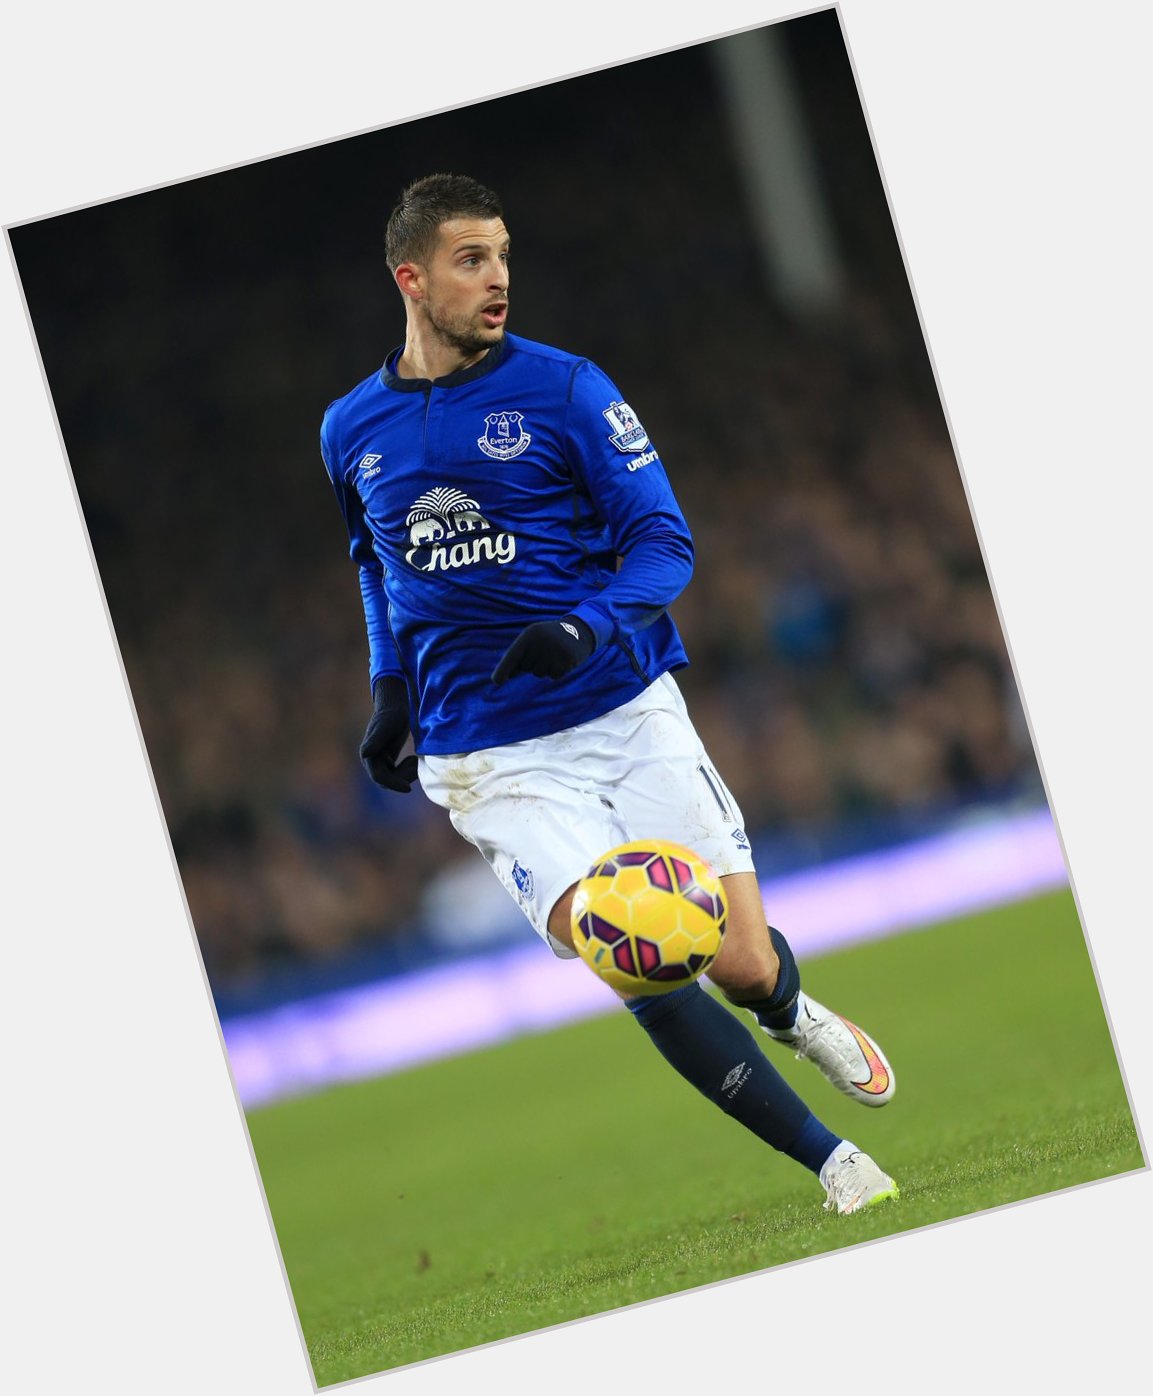 Happy Birthday to Kevin Mirallas of who turns 28 today! 